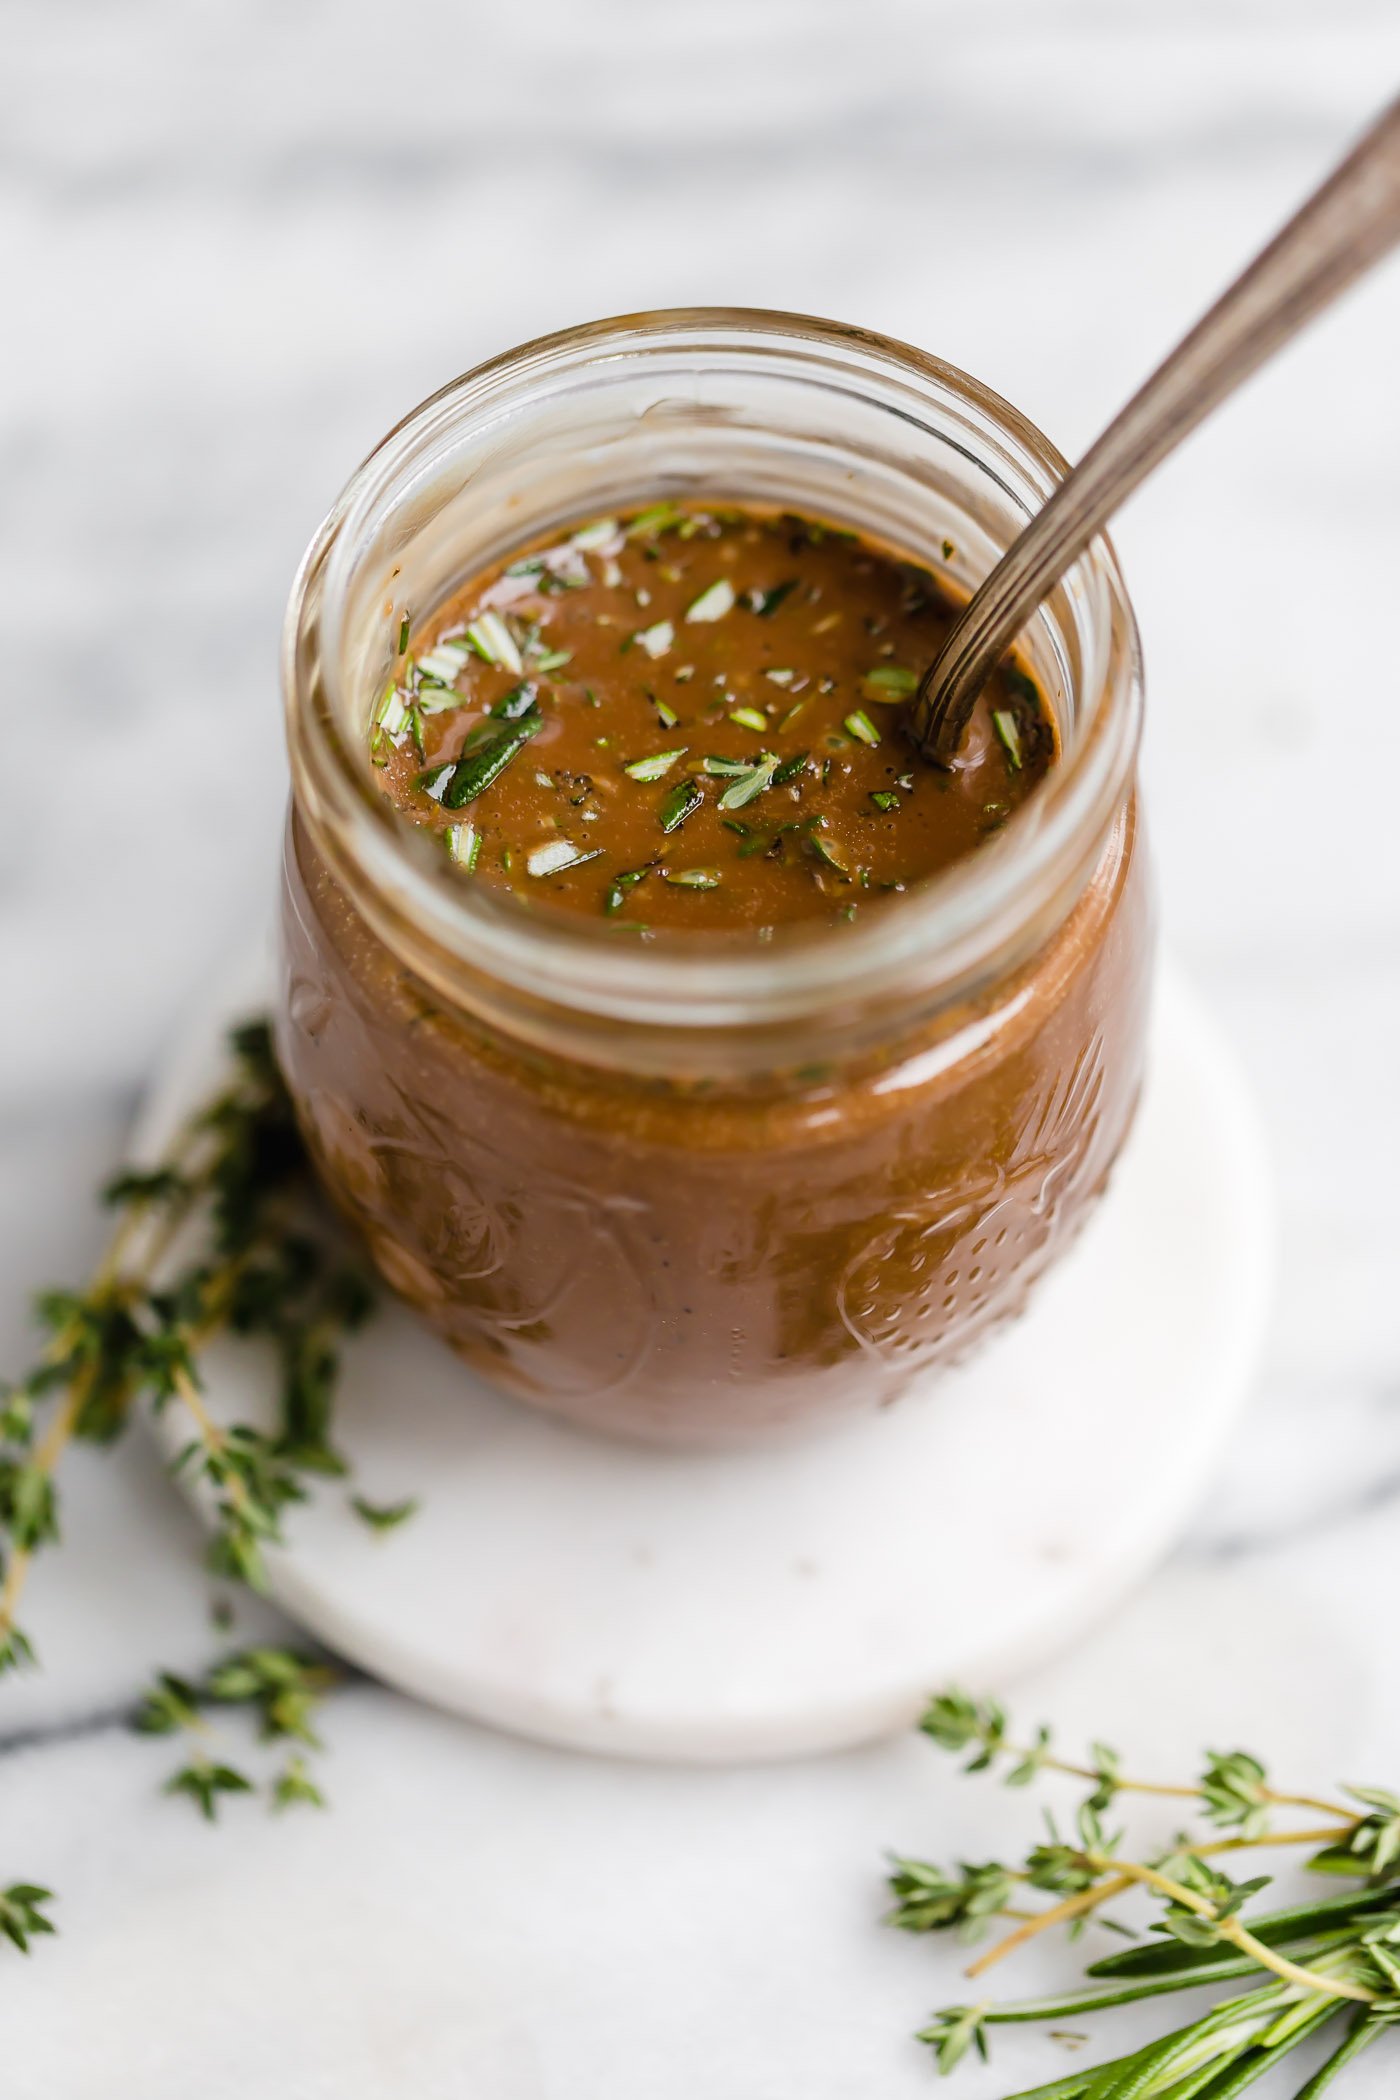 maple balsamic vinaigrette. a simple, but delicious balsamic vinaigrette recipe with pure maple syrup and freshly chopped rosemary & thyme. it takes less than 5 minutes to prep this quick & creamy balsamic vinaigrette, & it’s sure to take any salad to the next level! #playswellwithbutter #balsamicvinaigrette #balsamicvinaigrettedressing #balsamicdressing #saladdressingrecipes #saladdressing #creamybalsamicdressing